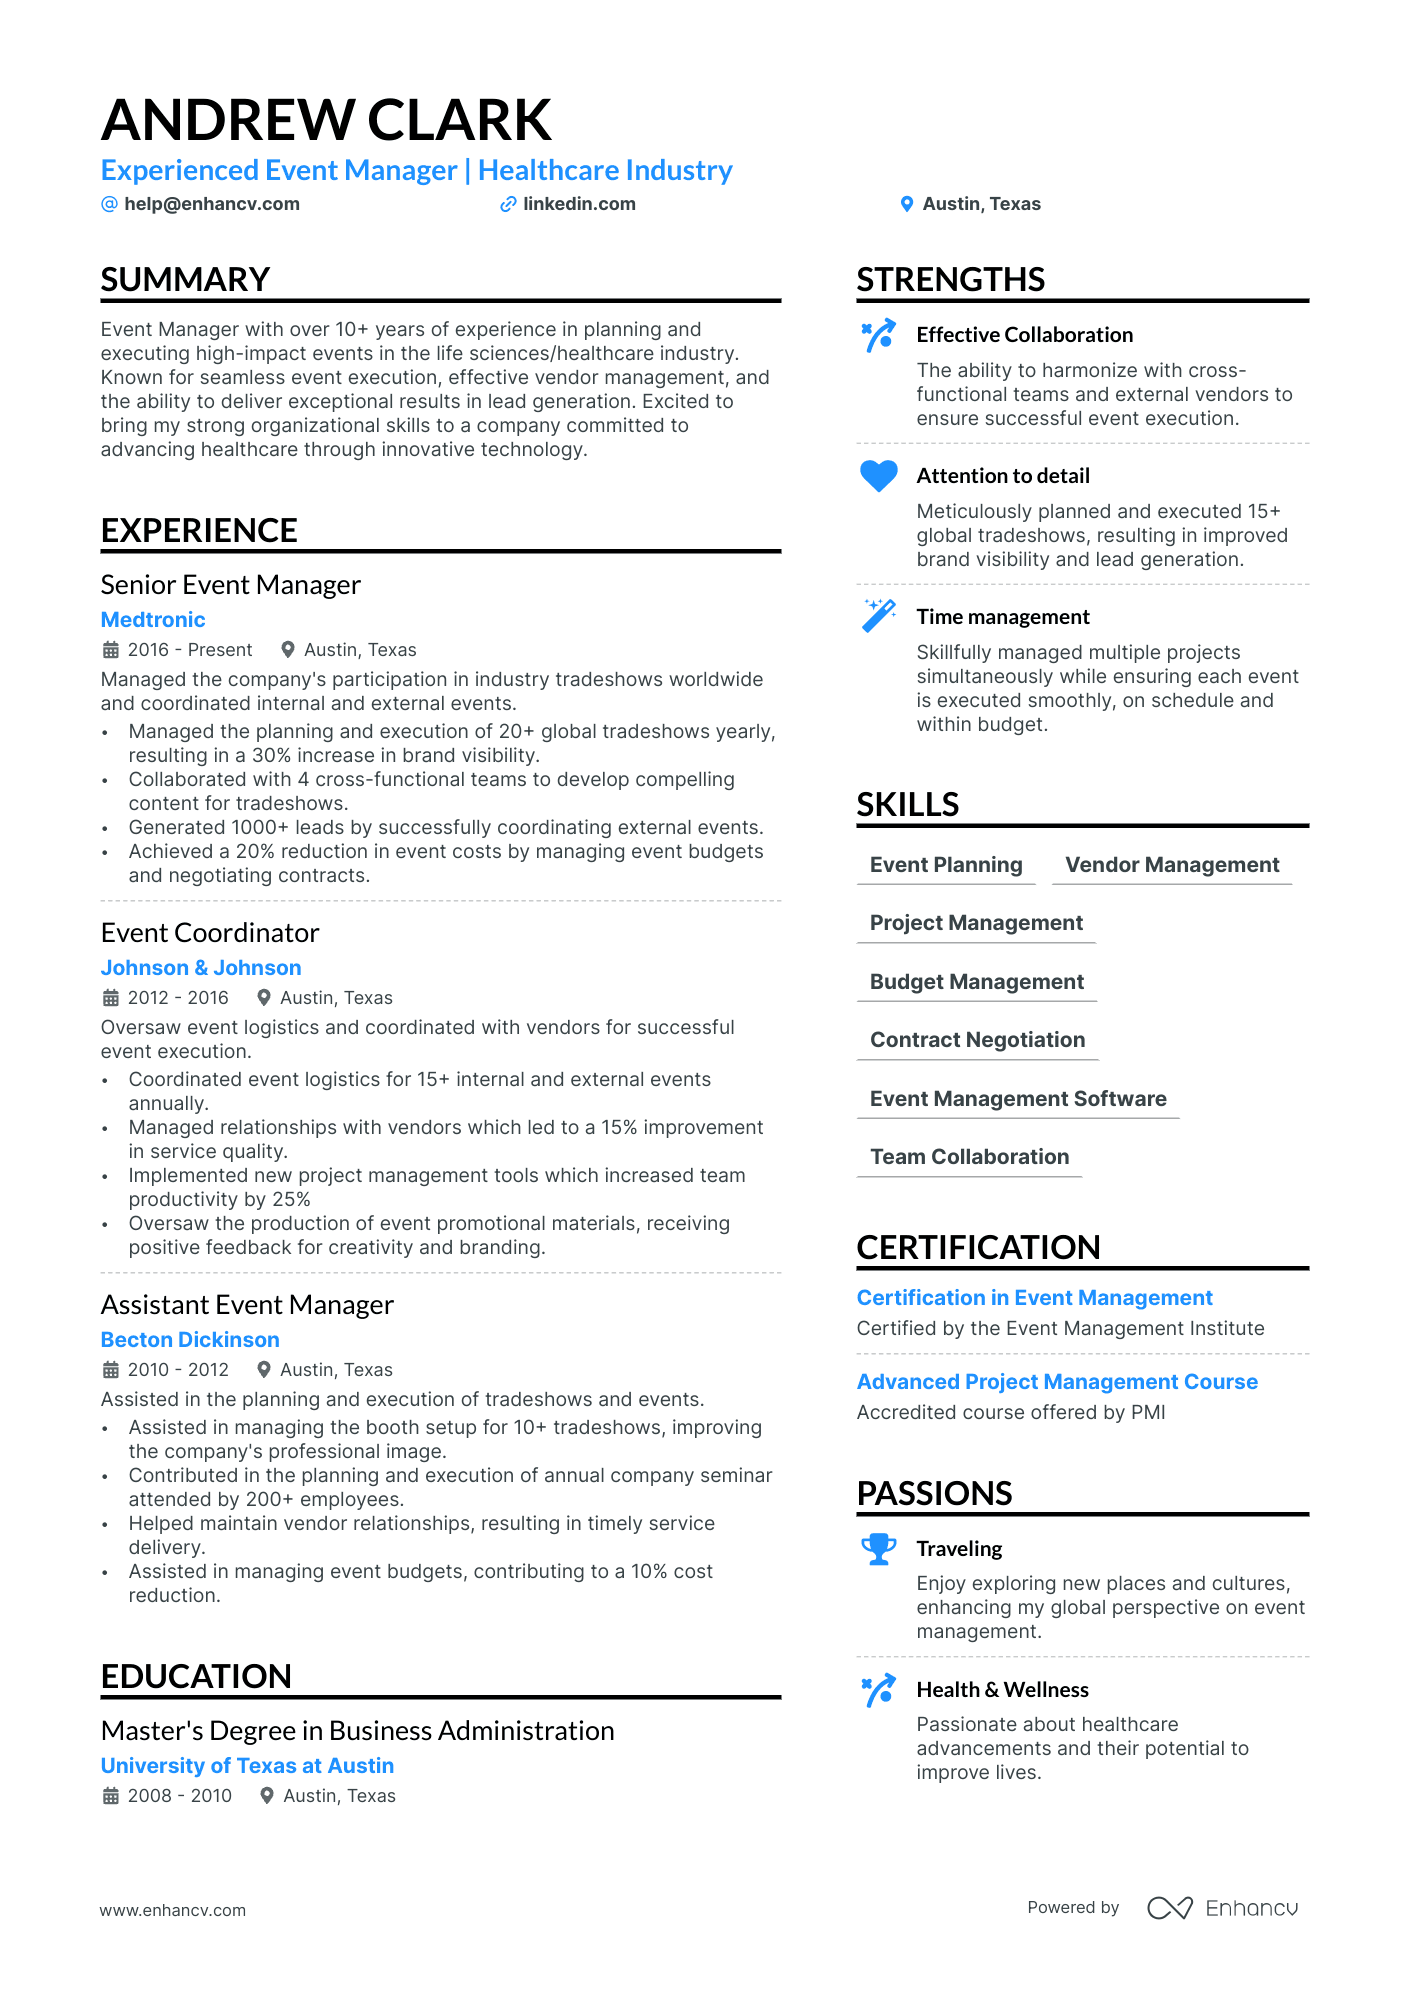 Events Manager resume example